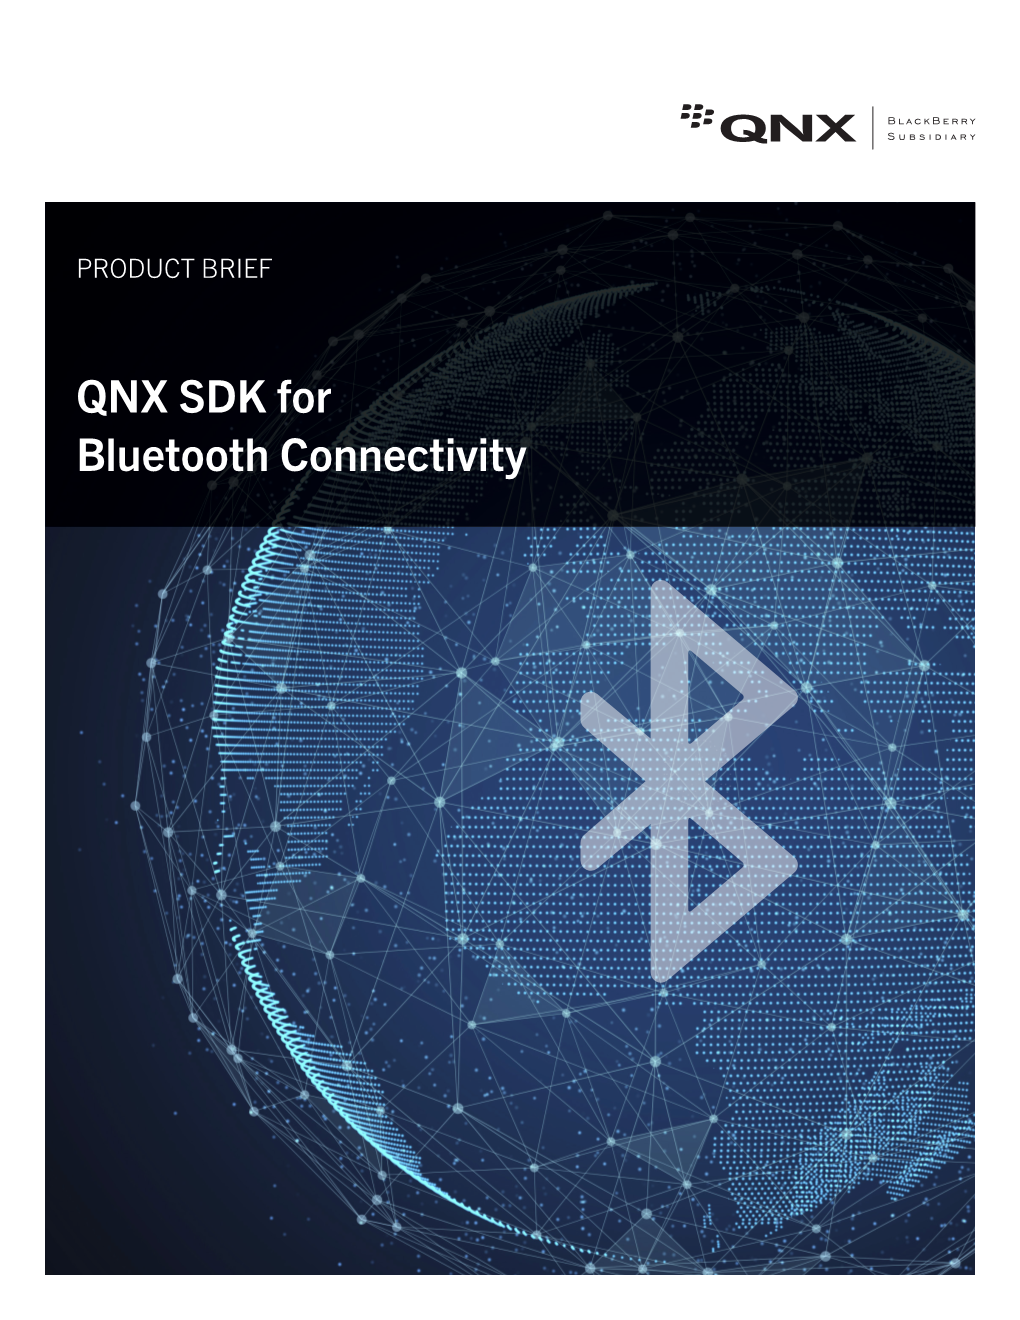 QNX SDK for Bluetooth Connectivity